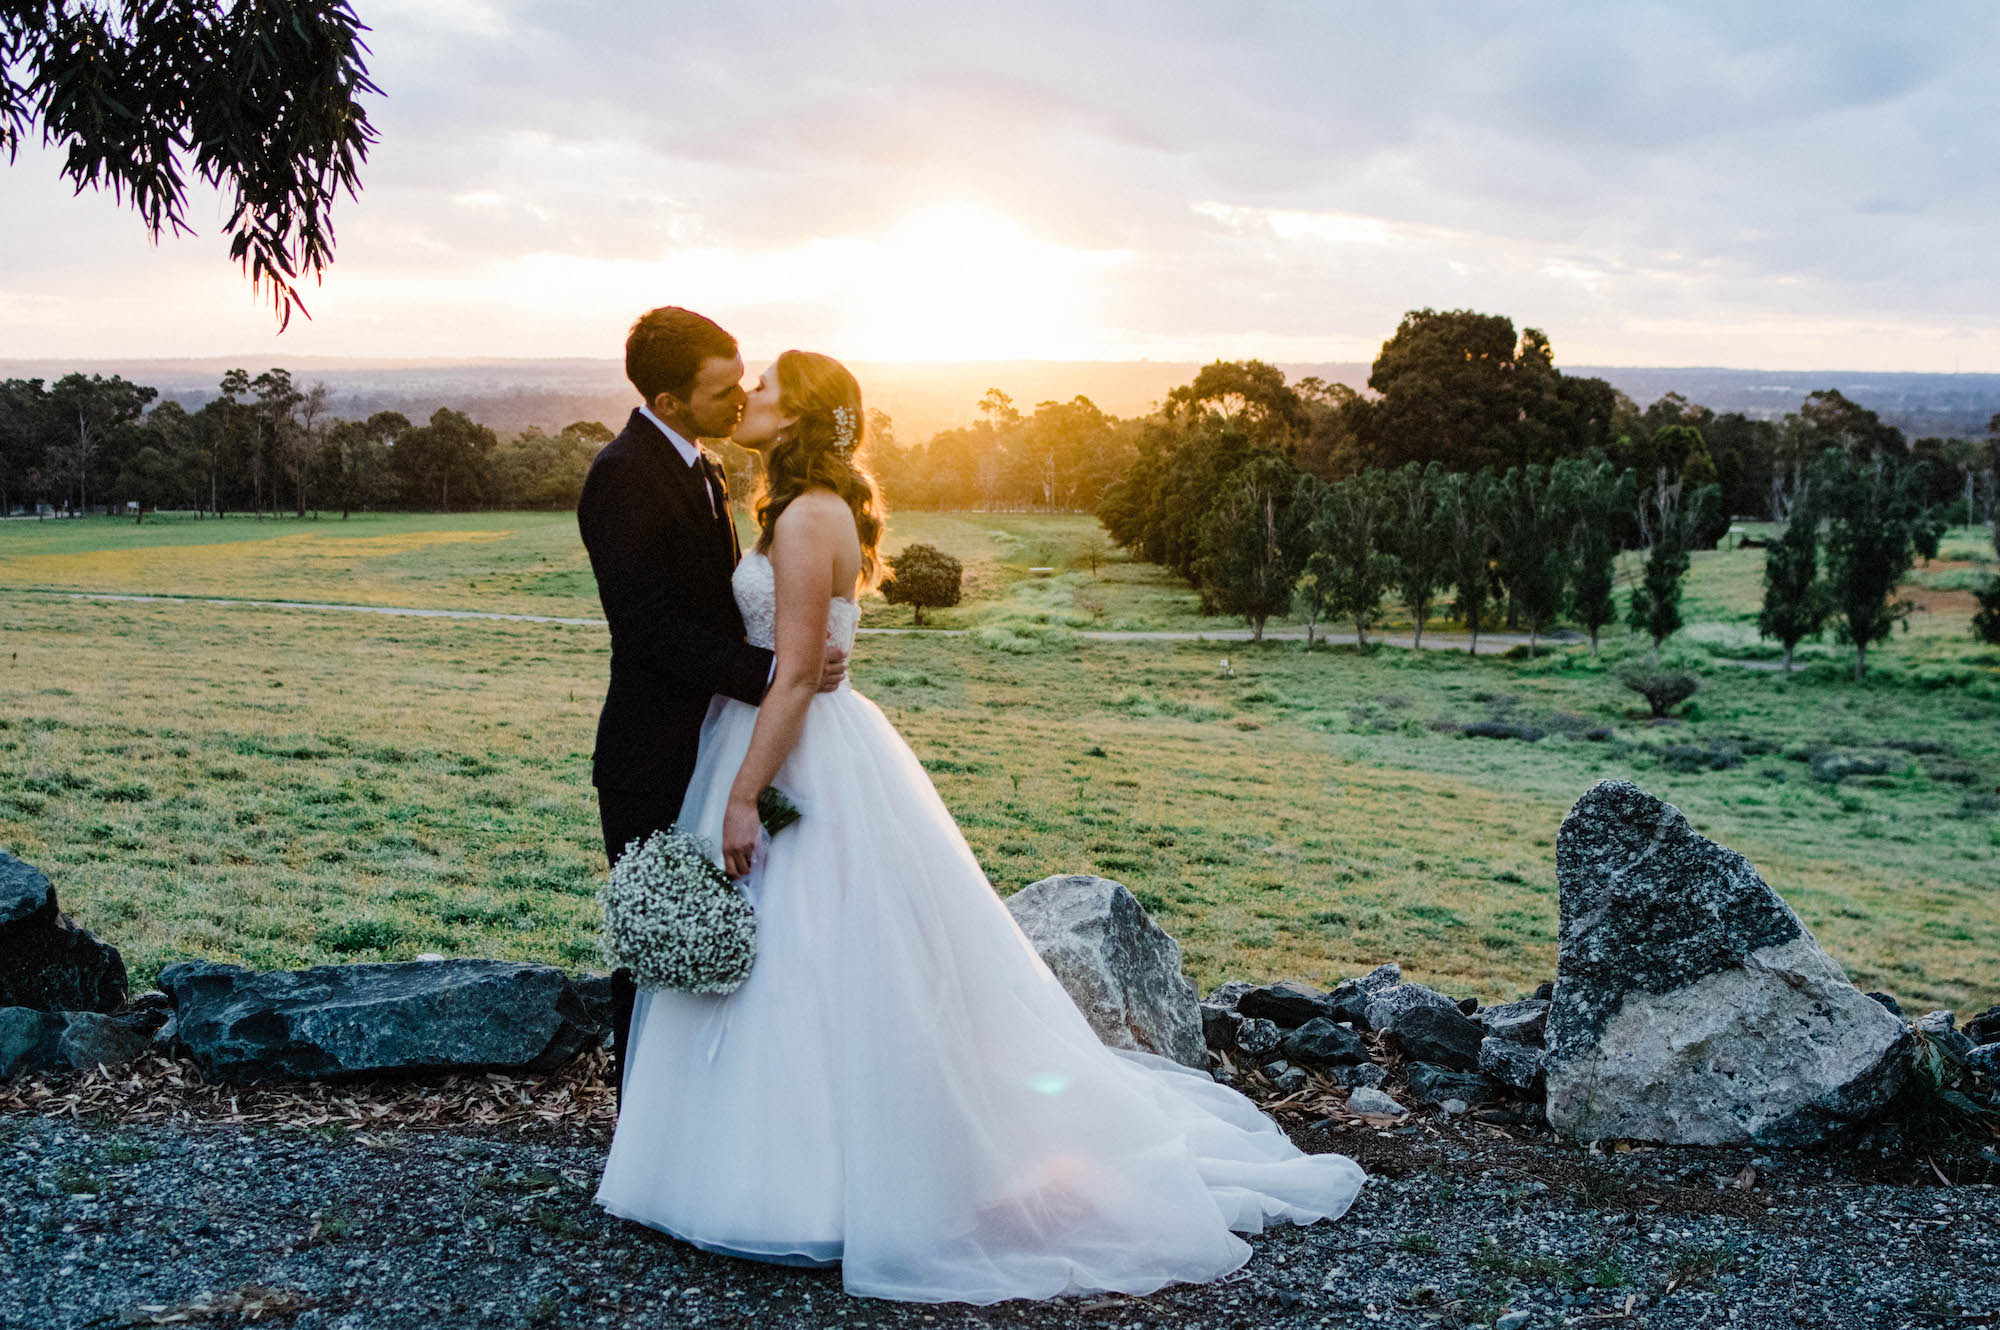 The bride & groom share a kiss in front of the sunset, taken by a perth wedding photographer.